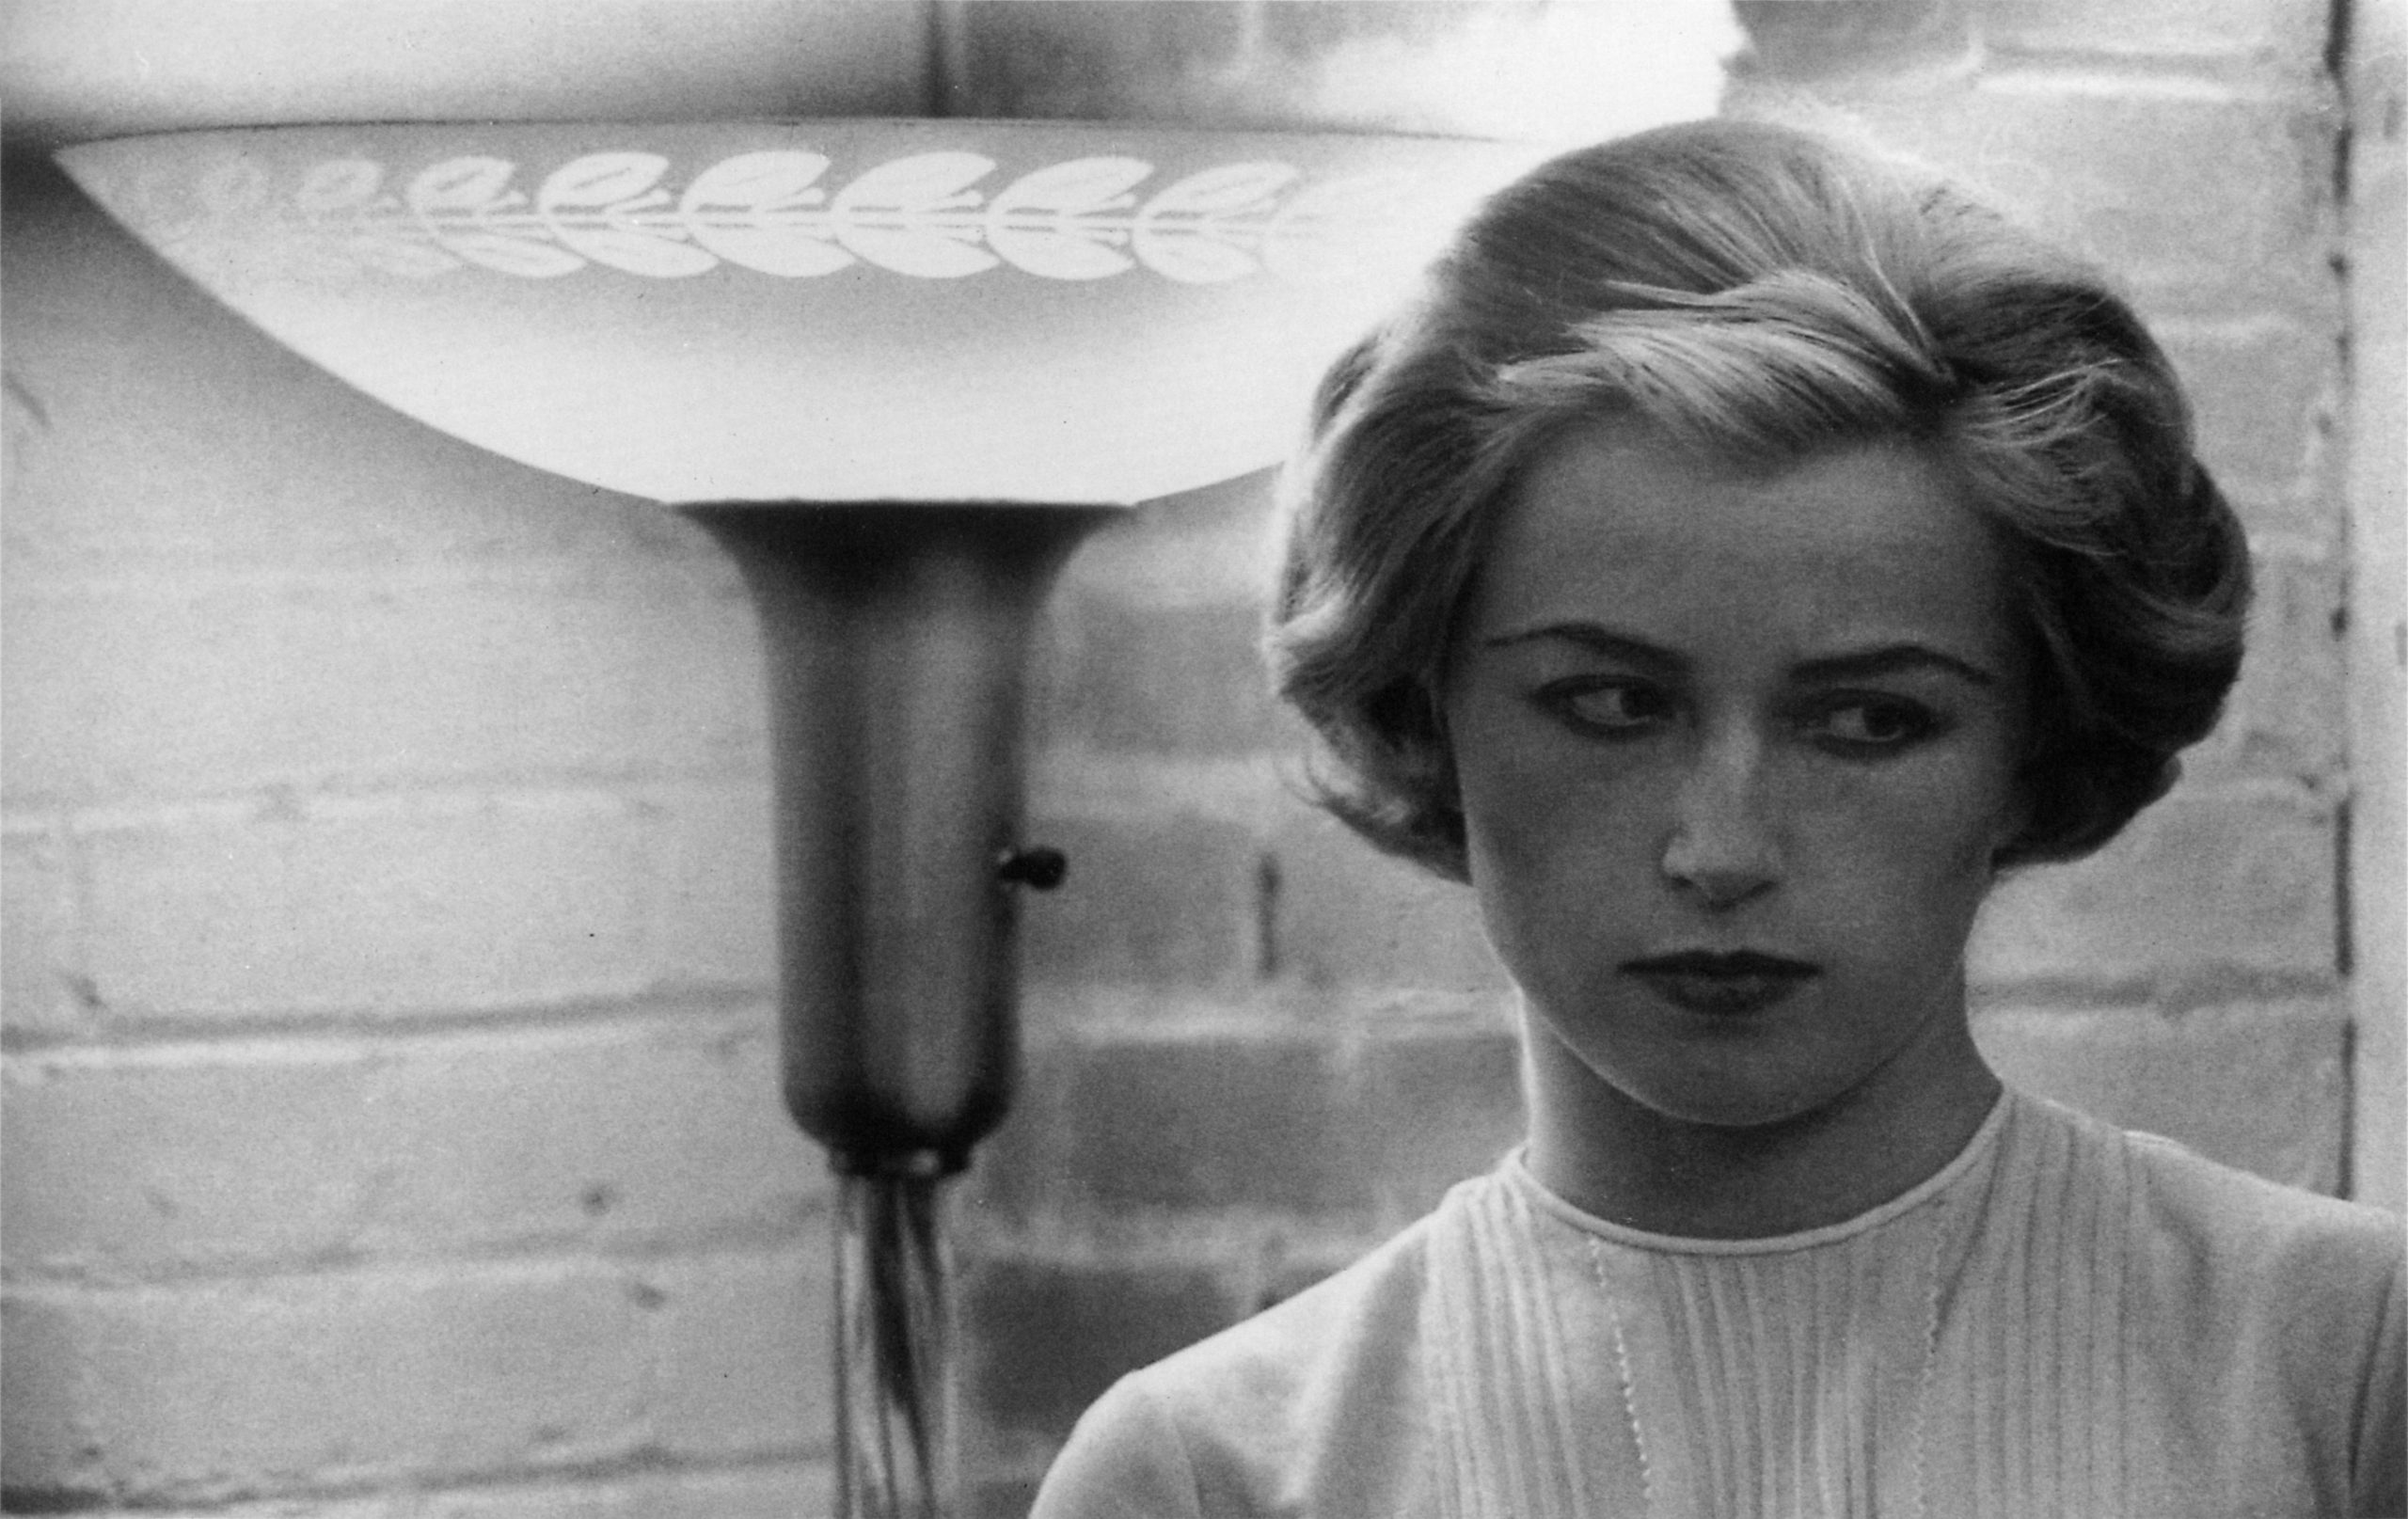 The films that influenced Cindy Sherman's 'Untitled Film Stills